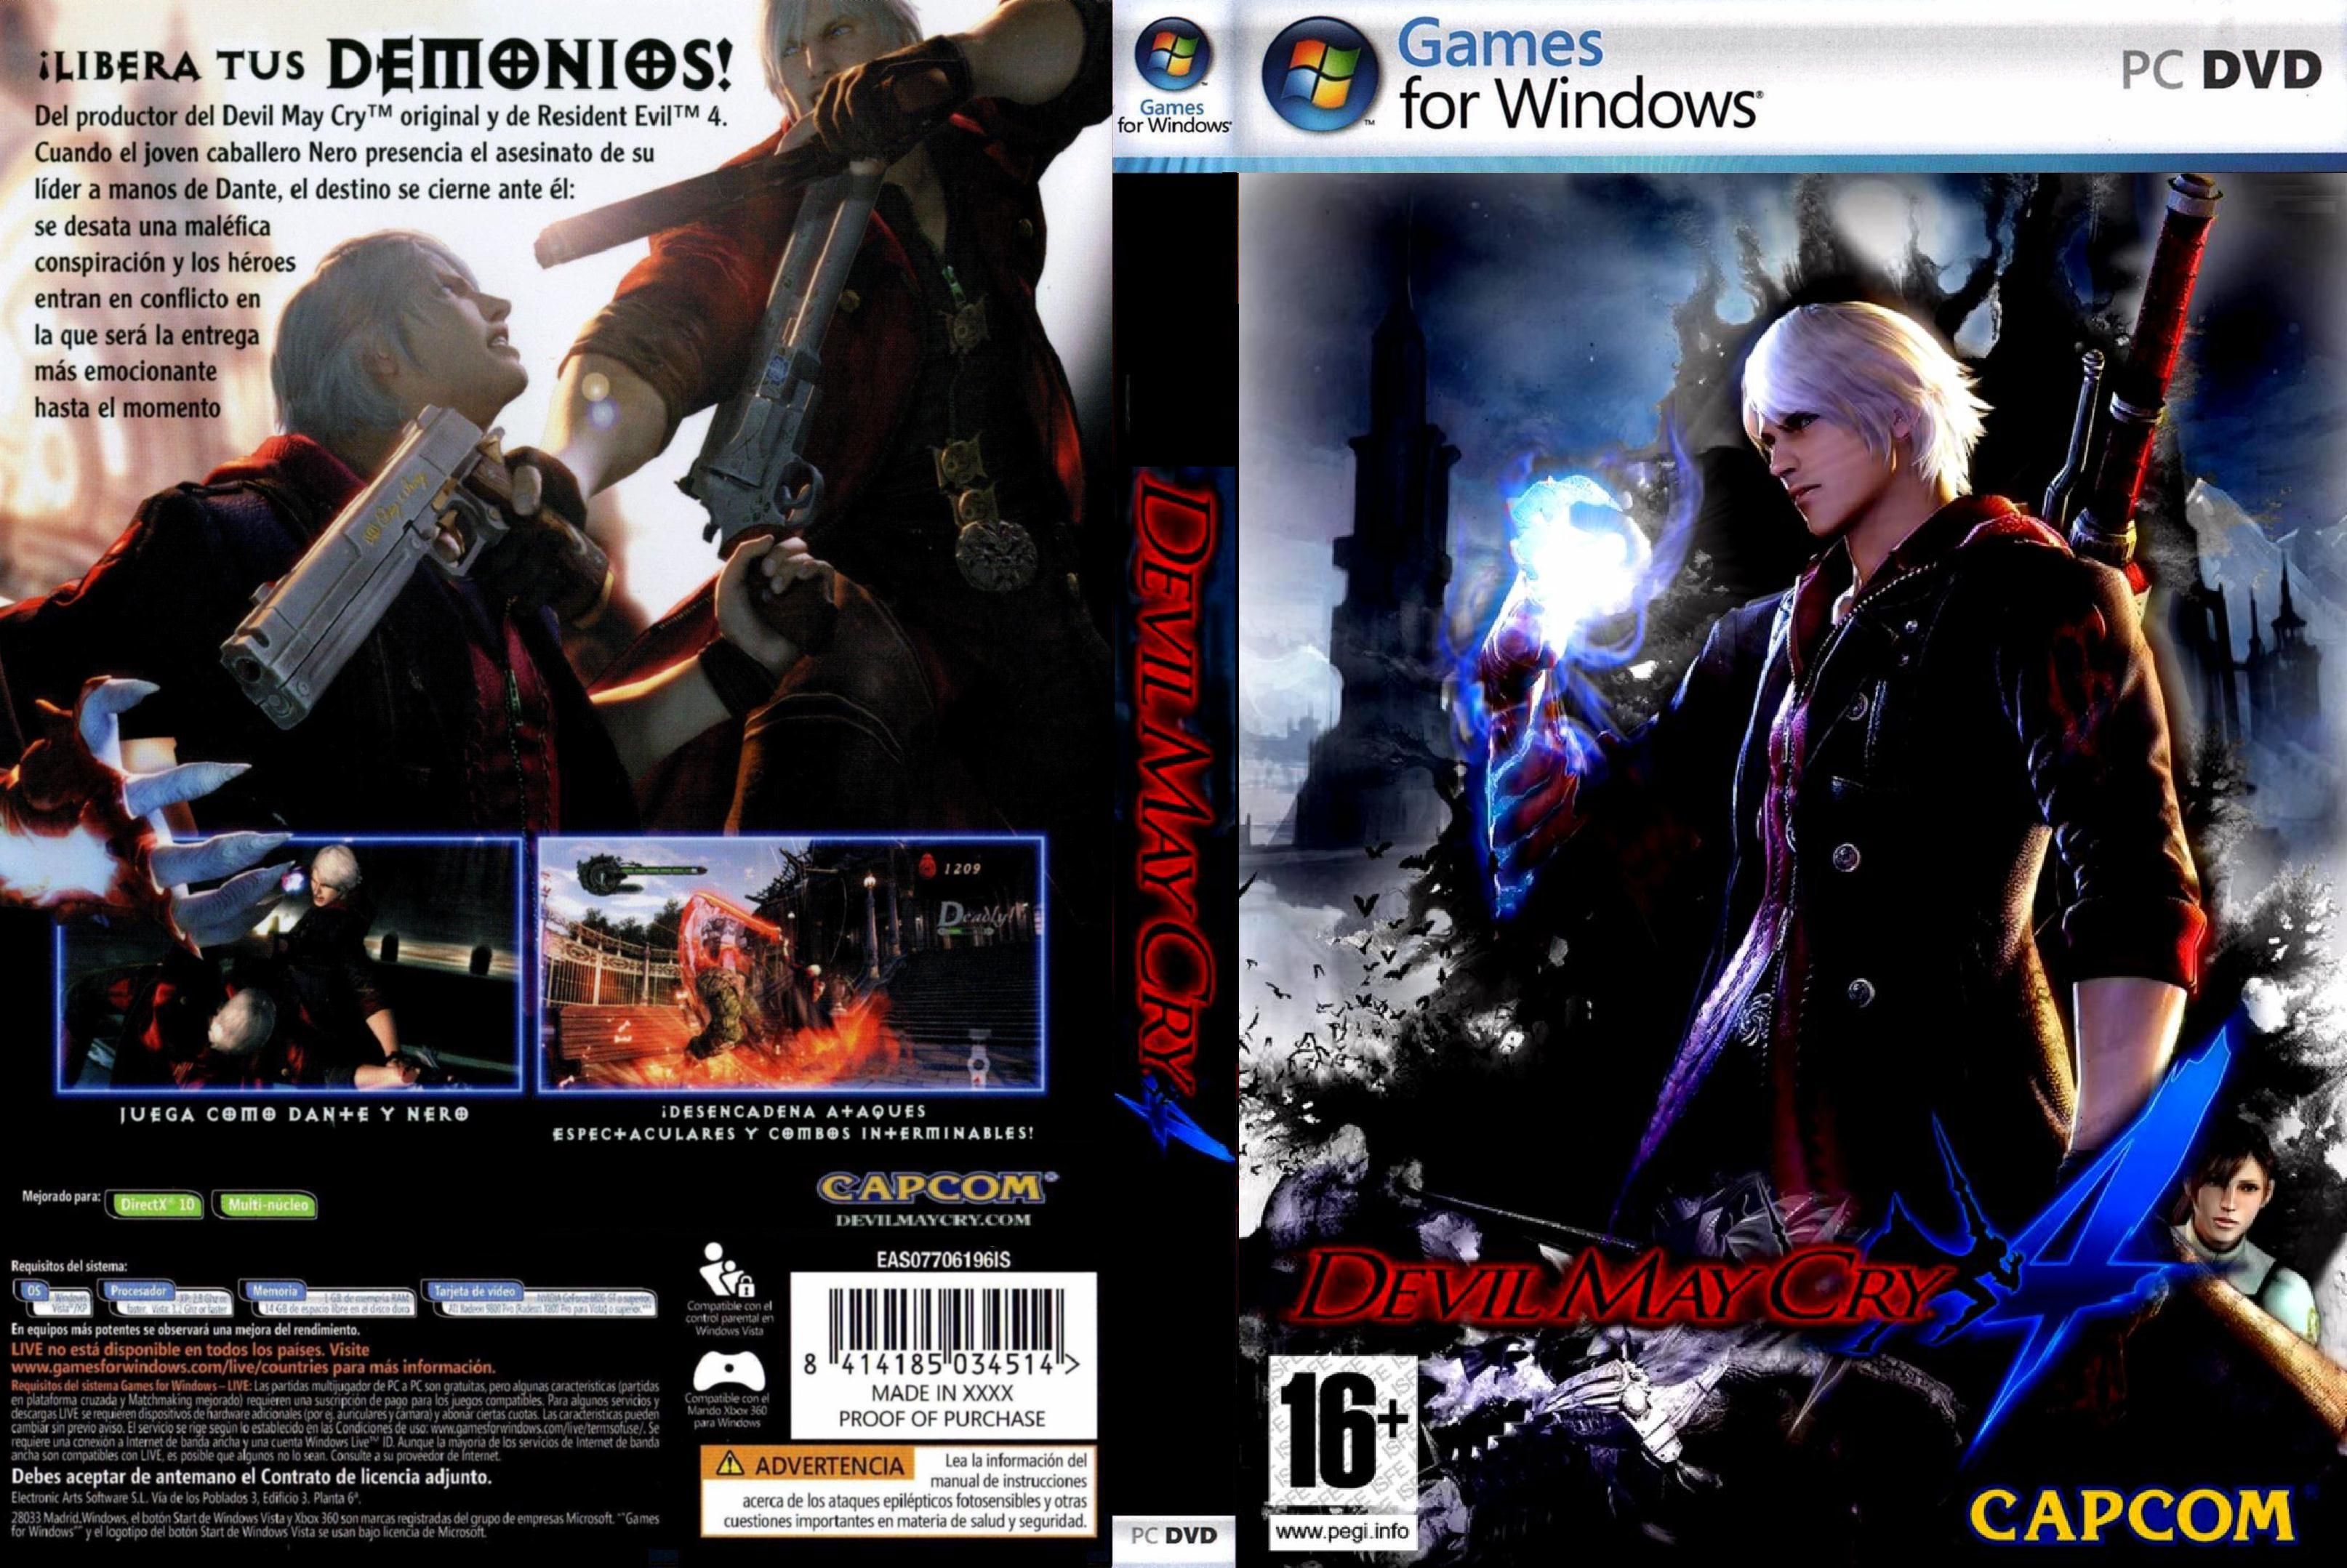 Devil may cry 4 pc download full